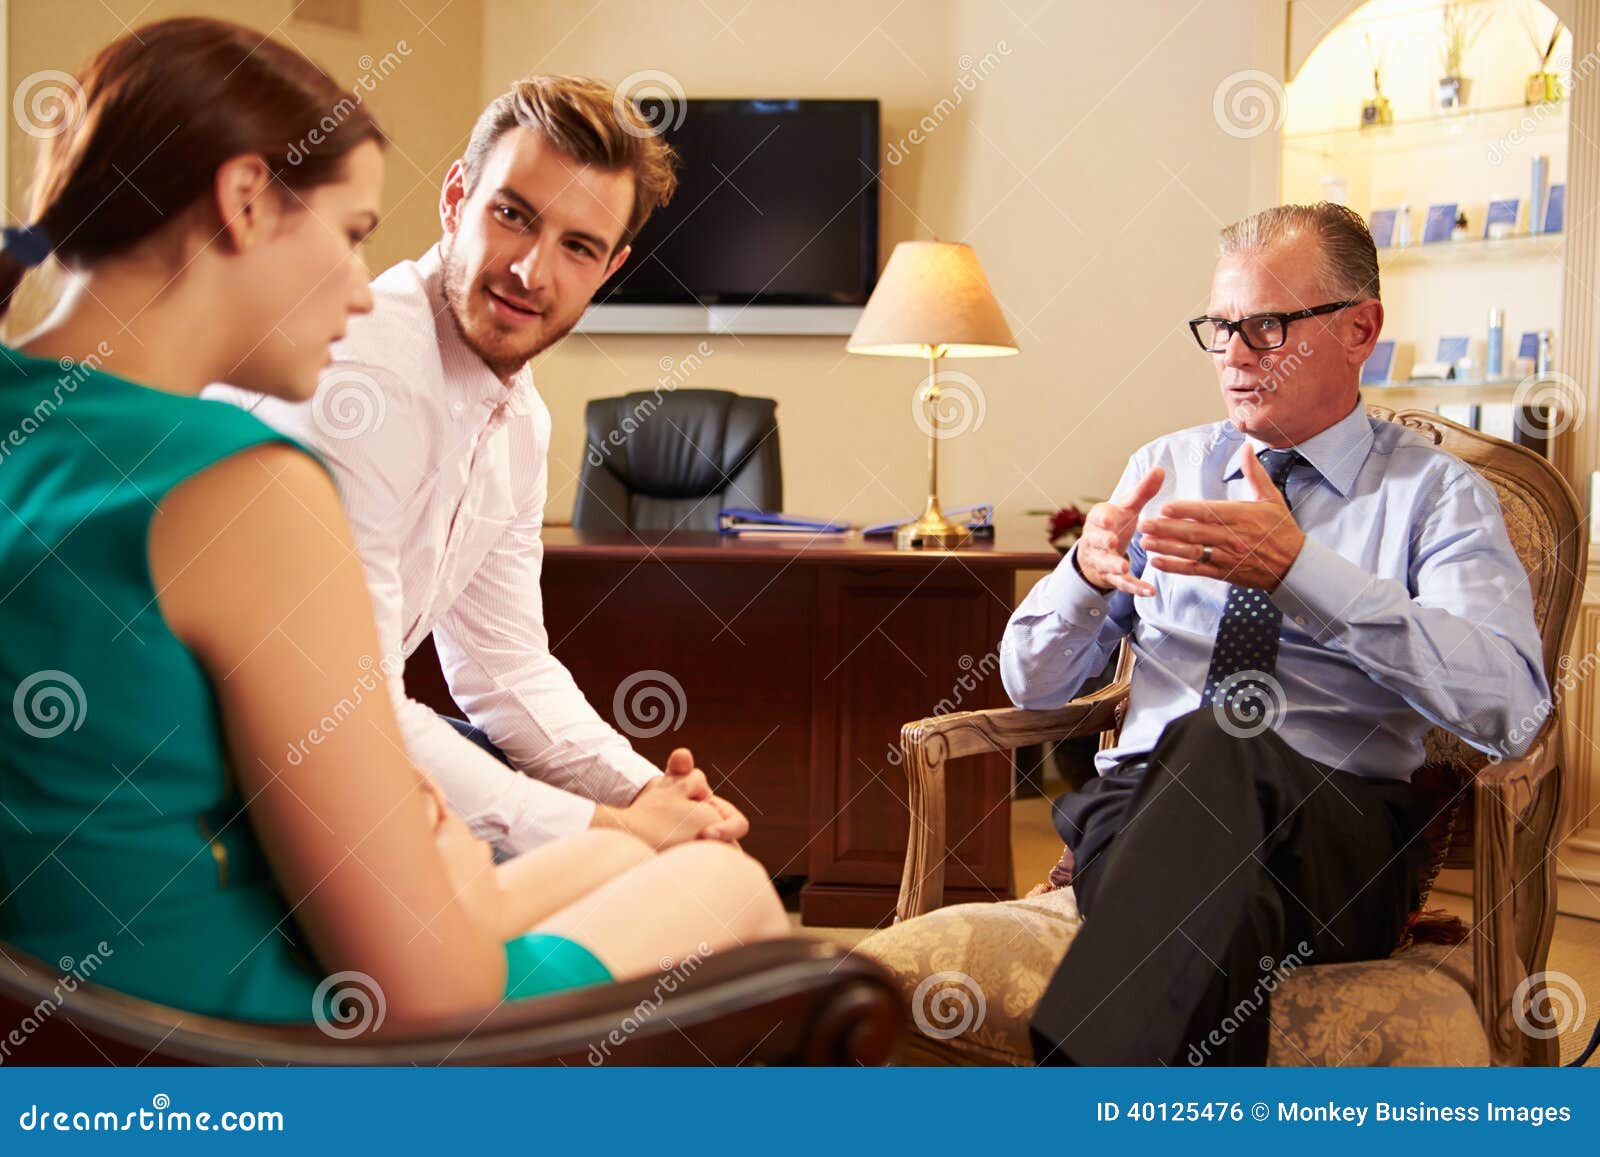 young couple talking to male counsellor